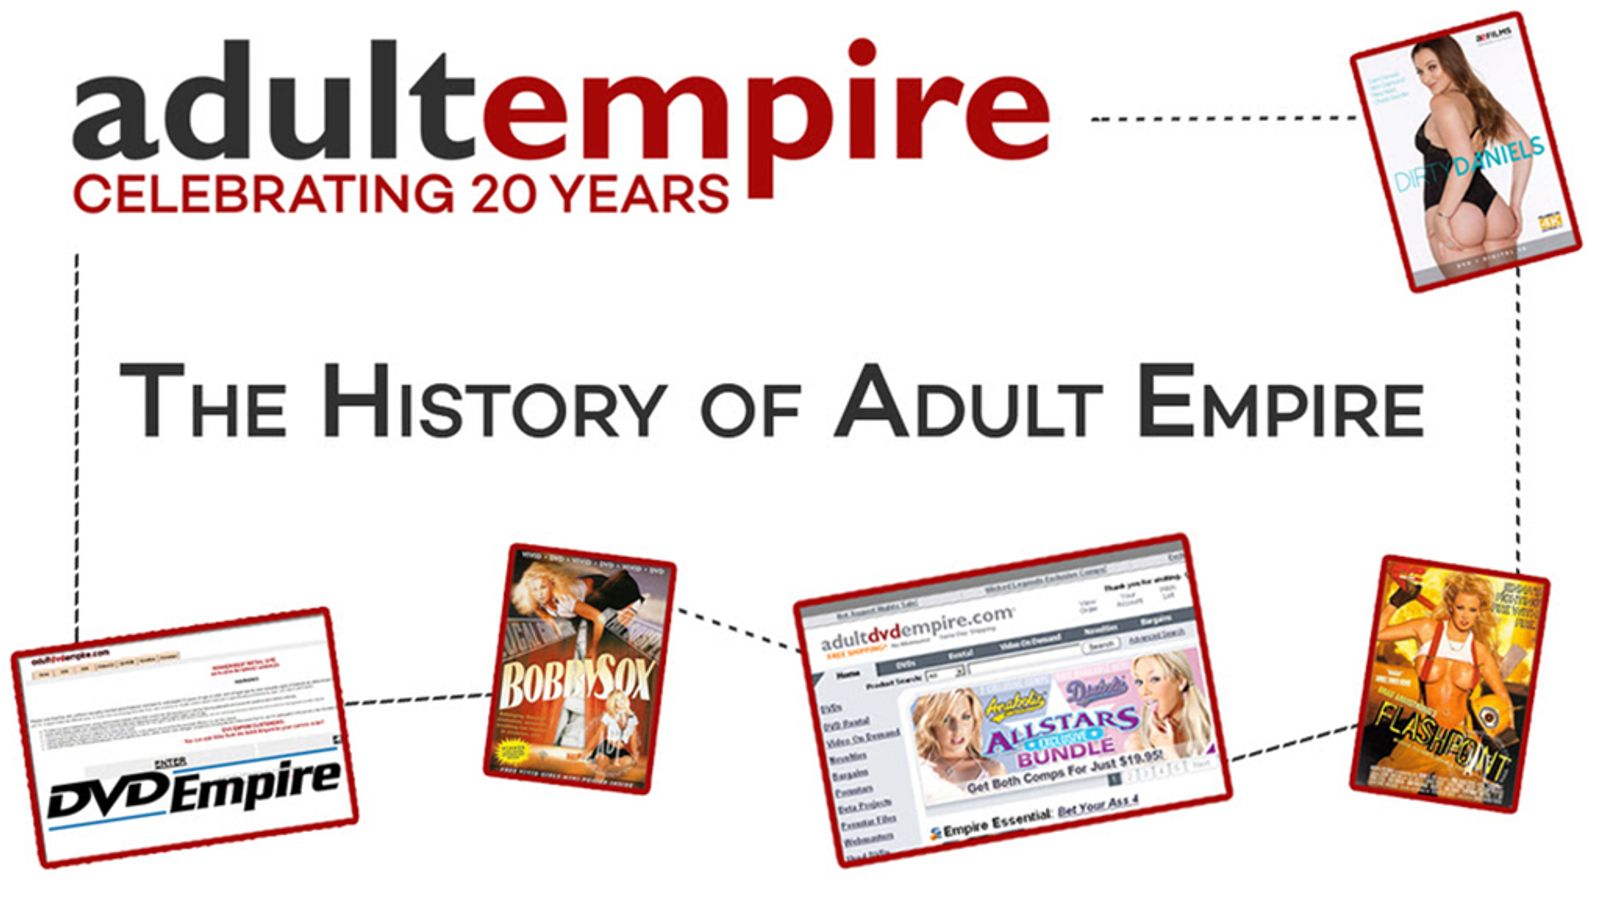 Adult Empire's First 20 Years Celebrated In YouTube Video